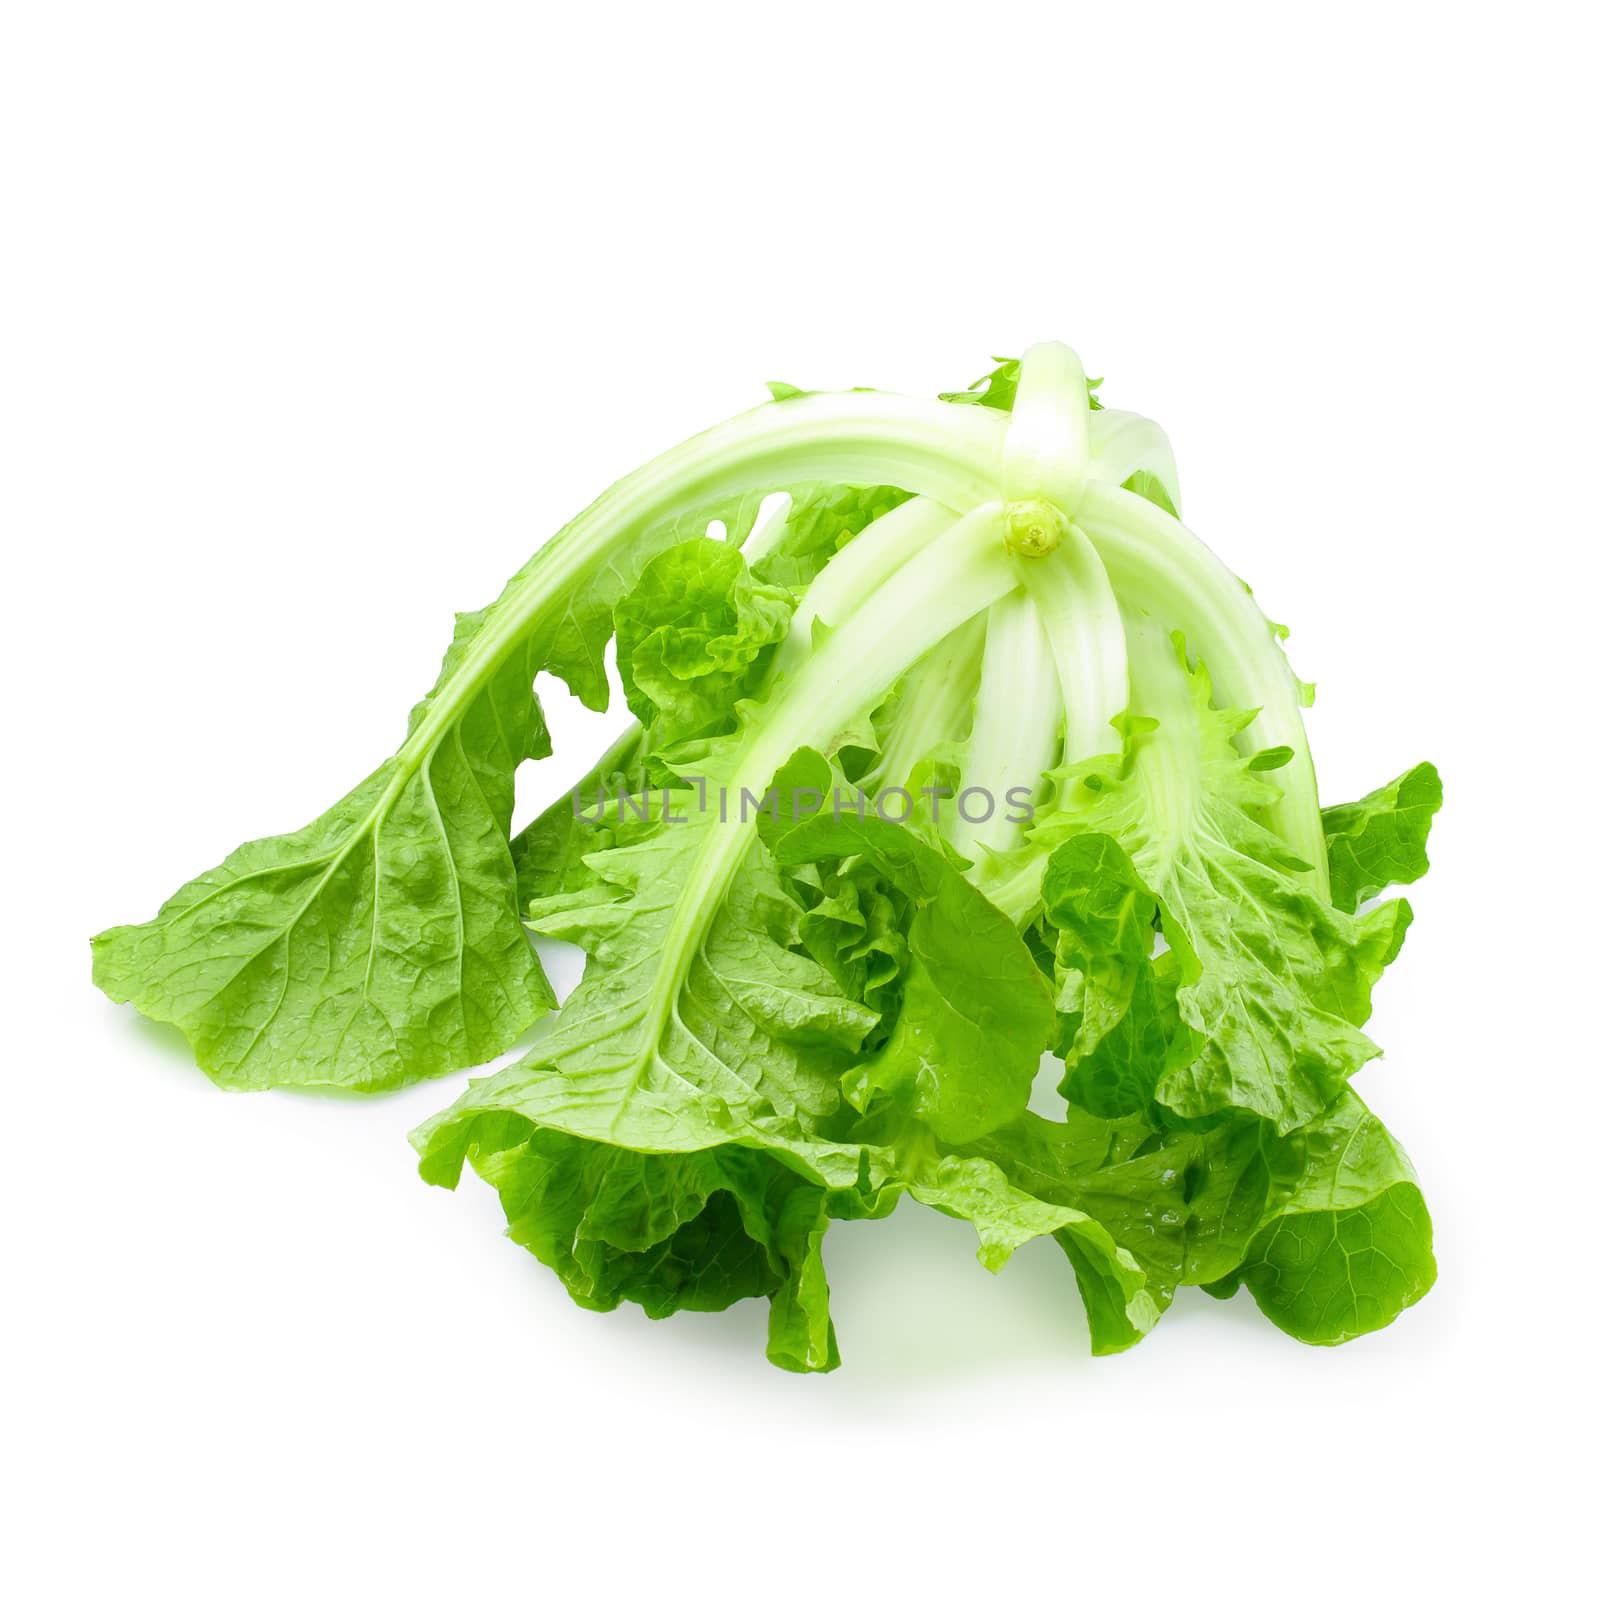 Lettuce leaves isolated on a white background.